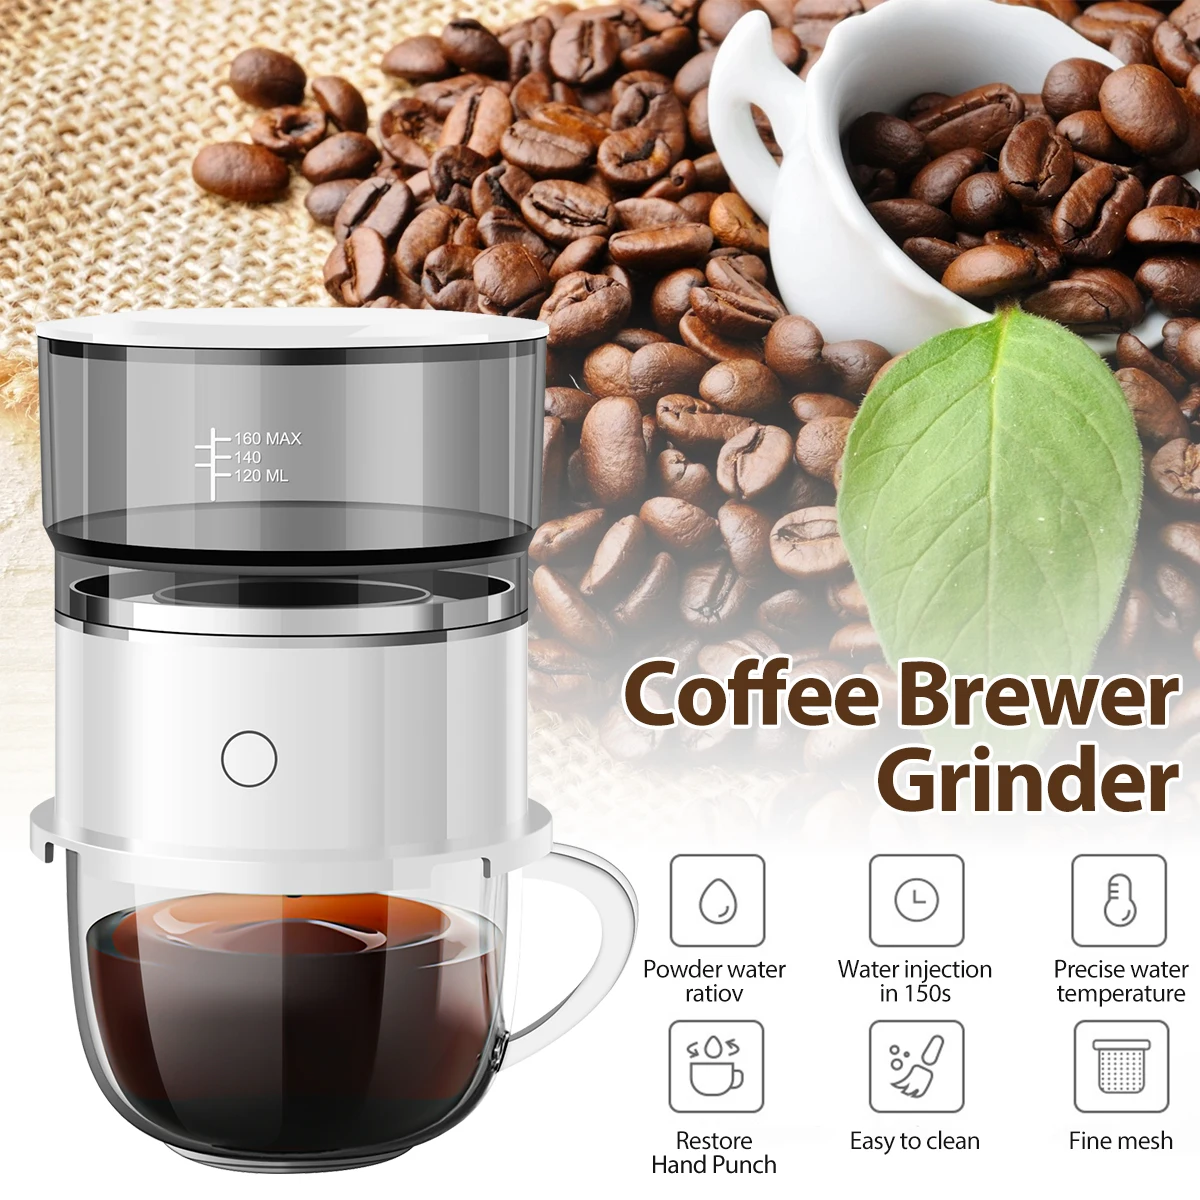 https://ae01.alicdn.com/kf/S7df50c4c59074fa4ba6e4e4079d195edJ/Portable-Drip-Coffee-Pot-Smart-Automatic-Hand-Brewing-Coffee-Machine-Battery-Powered-Coffee-Brewer-Grinder-for.jpg